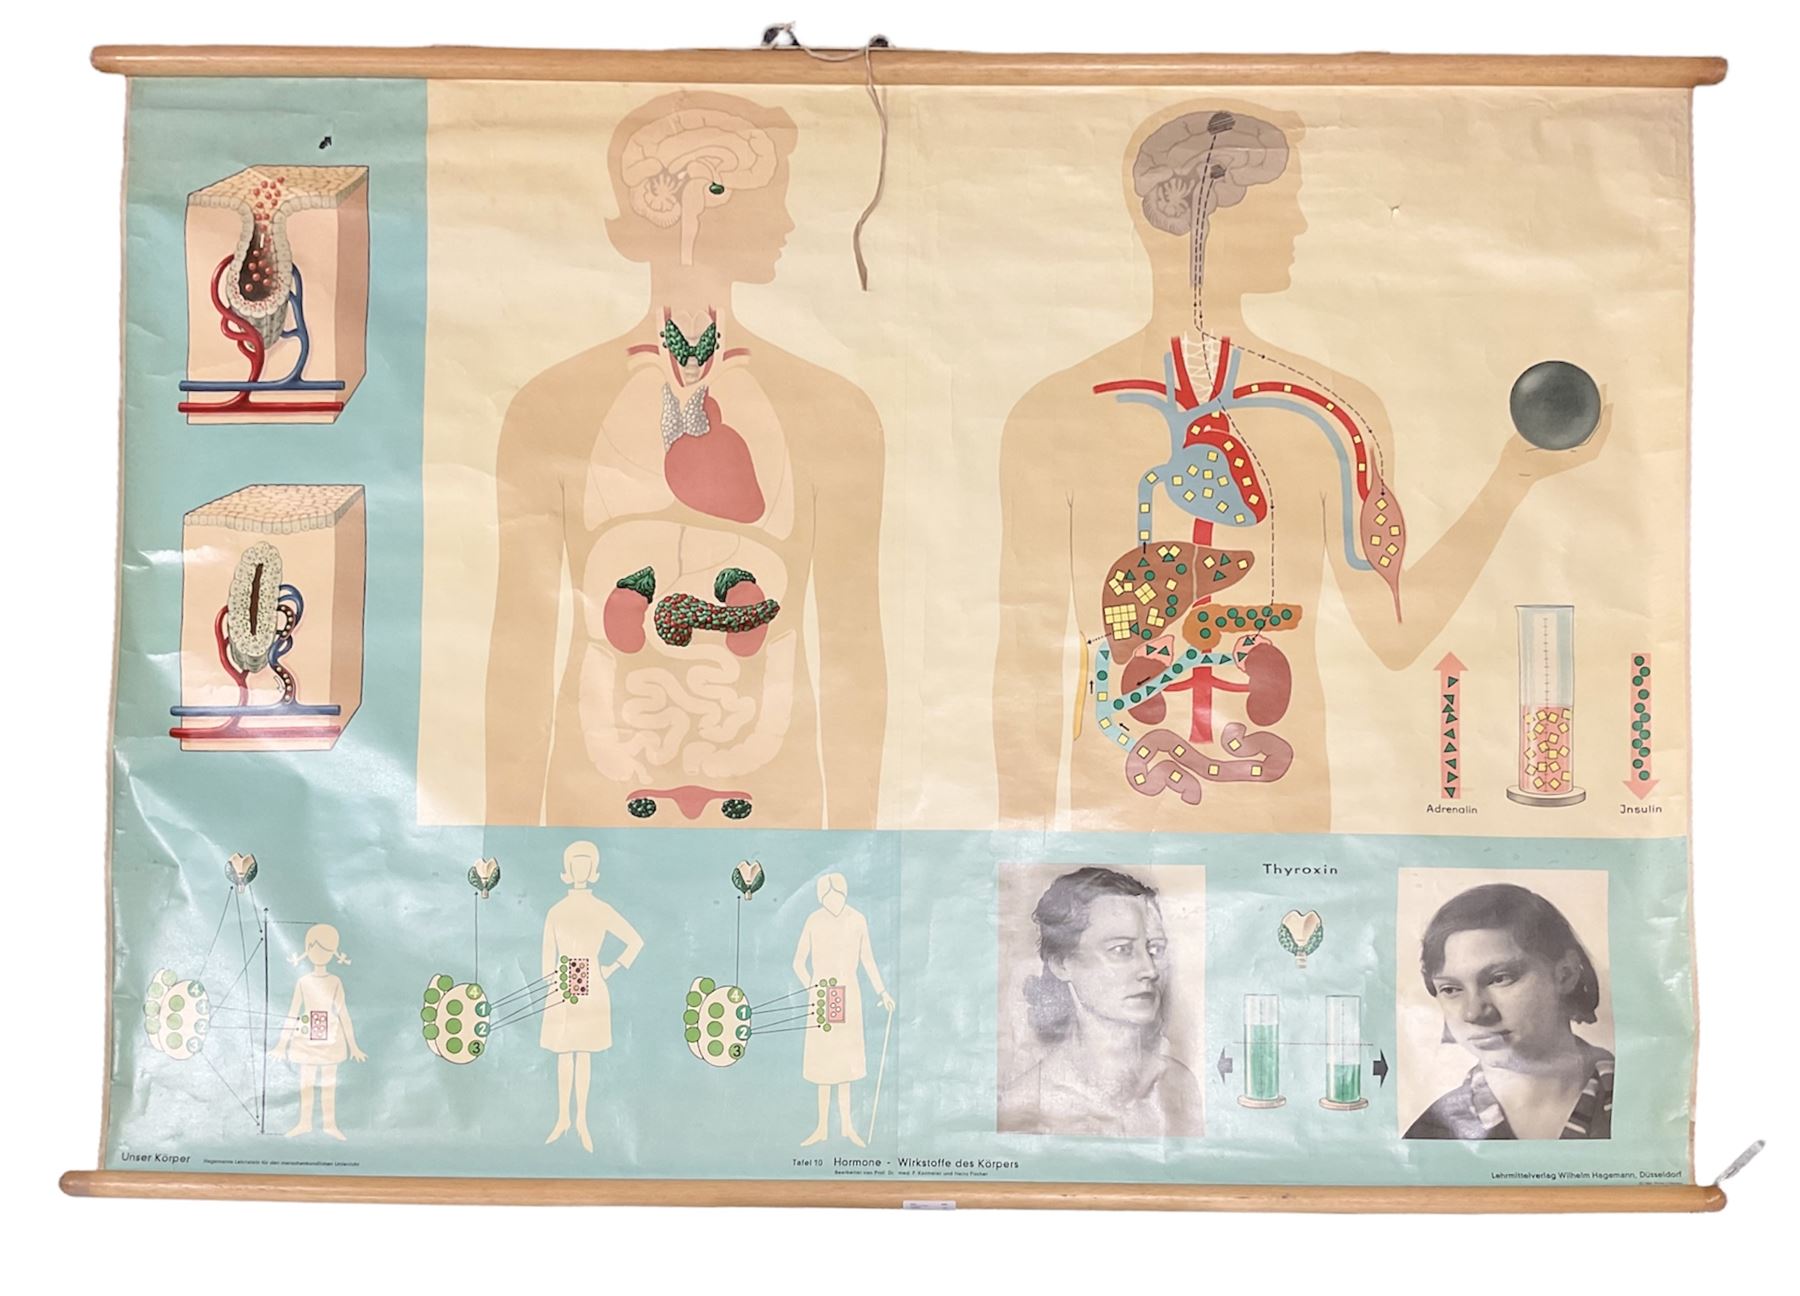 Large 1960s German educational school poster illustrating the endocrine (hormone) system